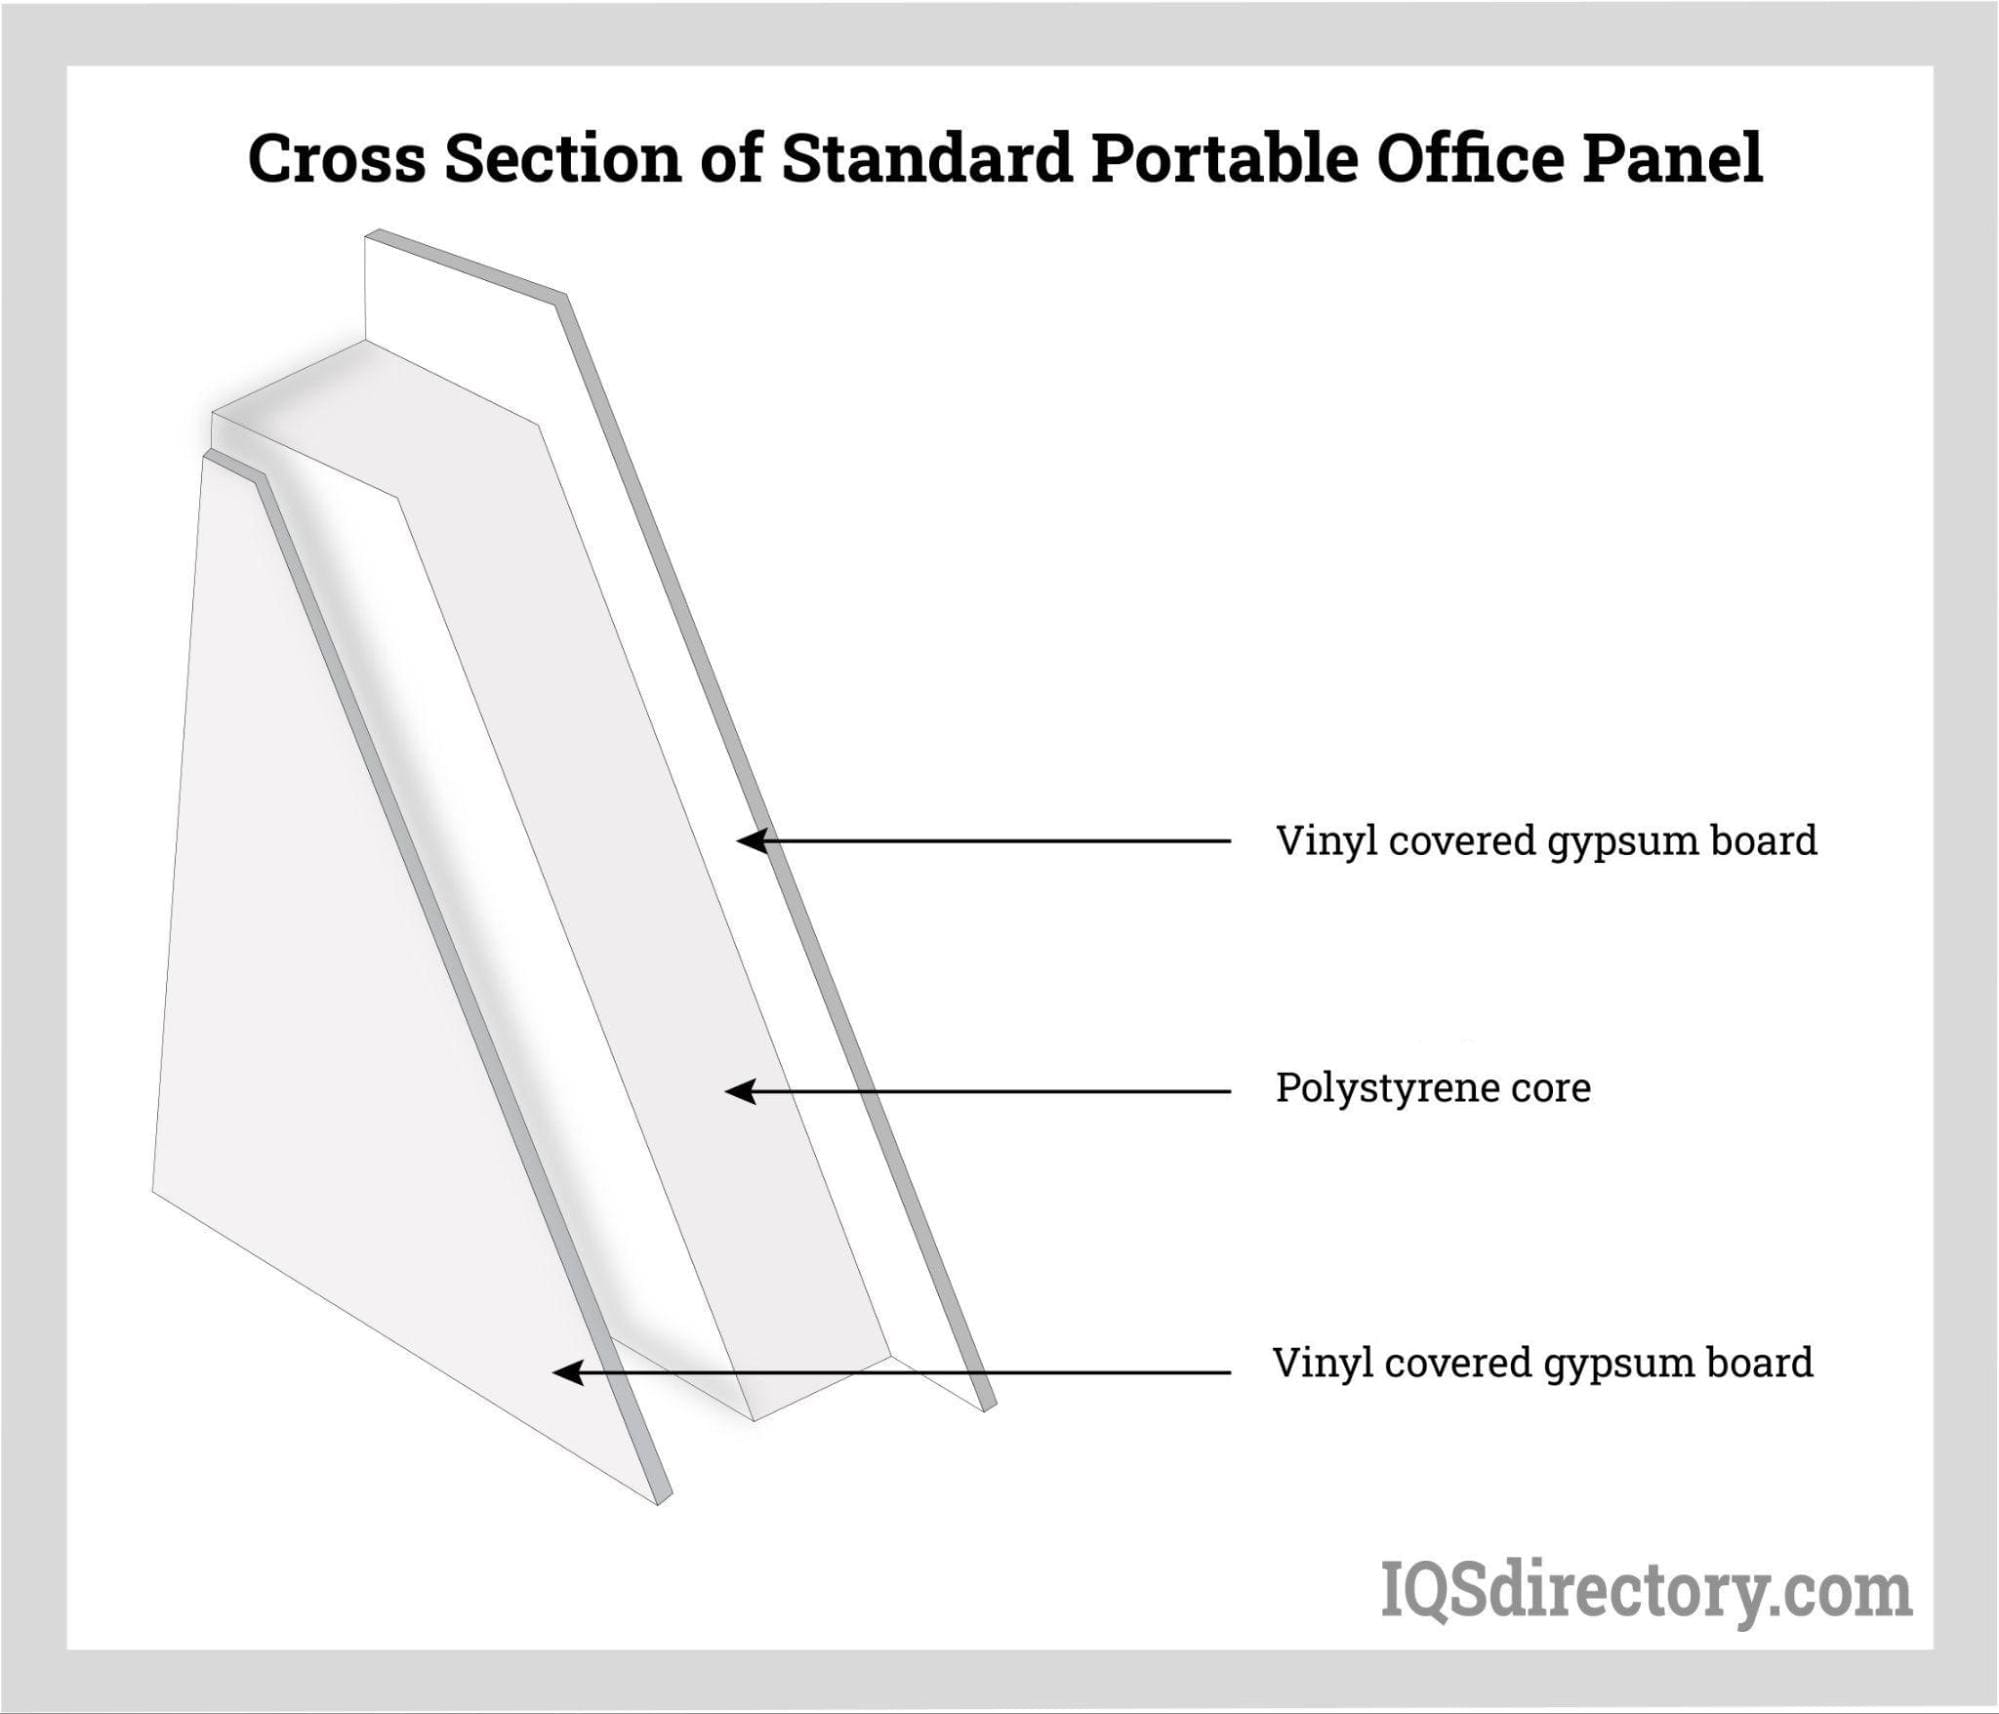 Cross Section of Standard Portable Office Panel